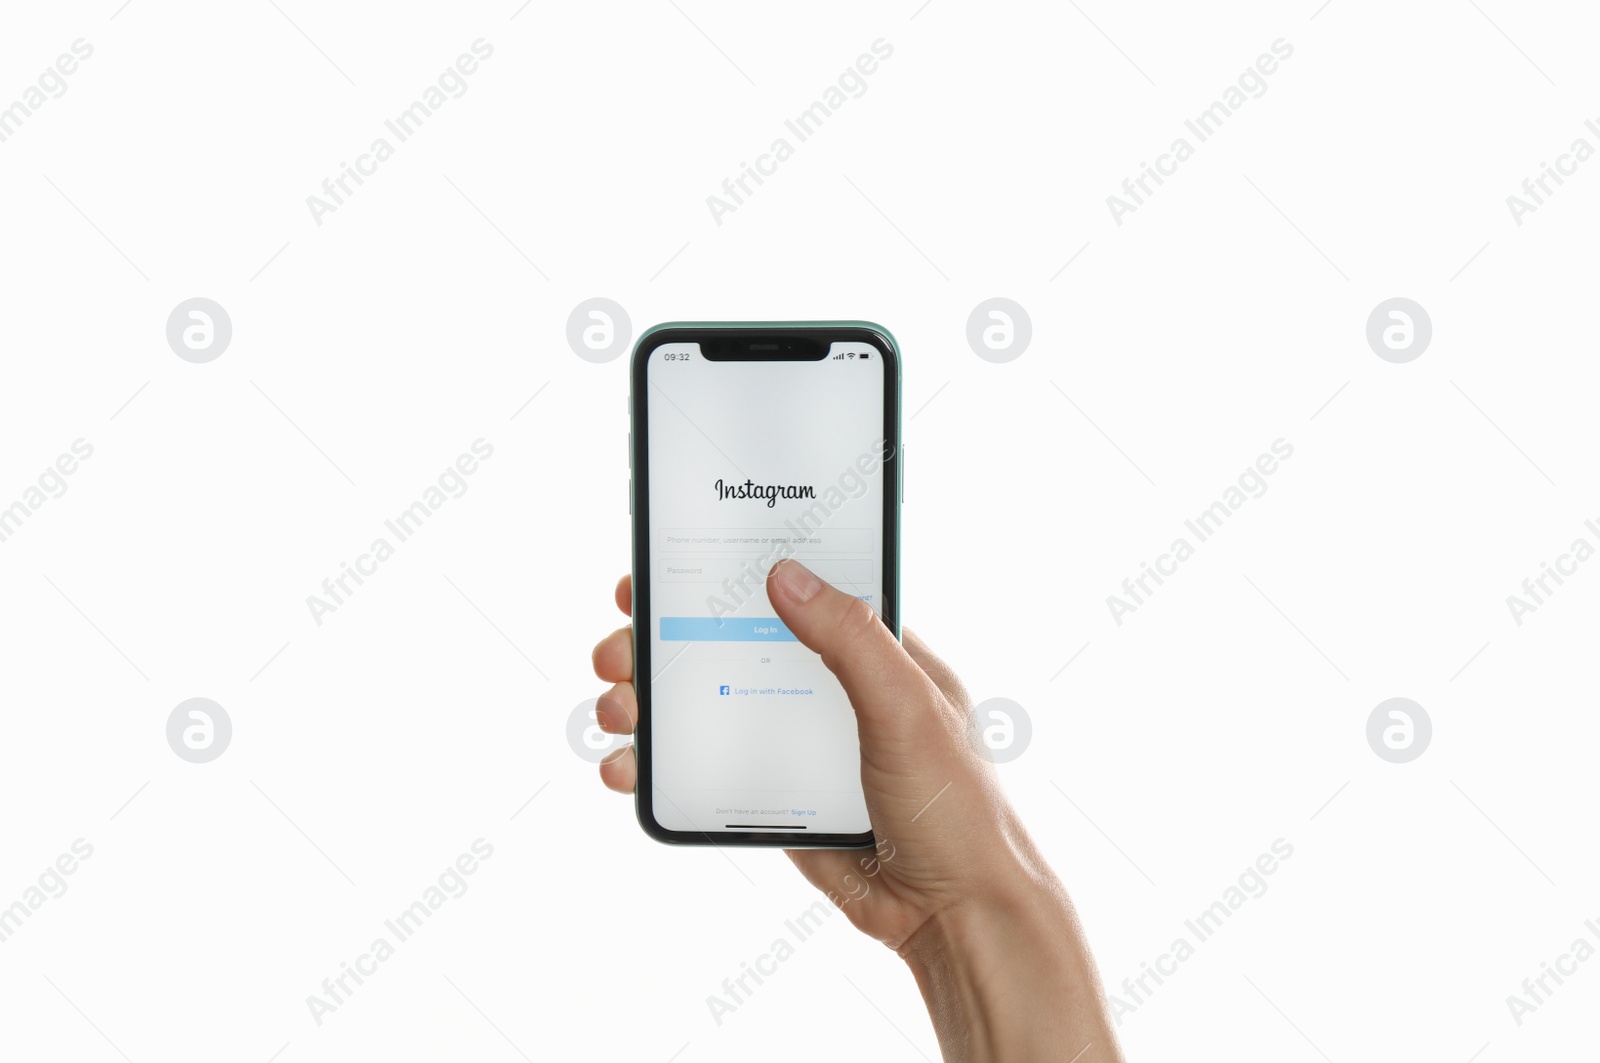 Photo of MYKOLAIV, UKRAINE - JULY 9, 2020: Woman holding iPhone 11 with Instagram app on screen against white background, closeup